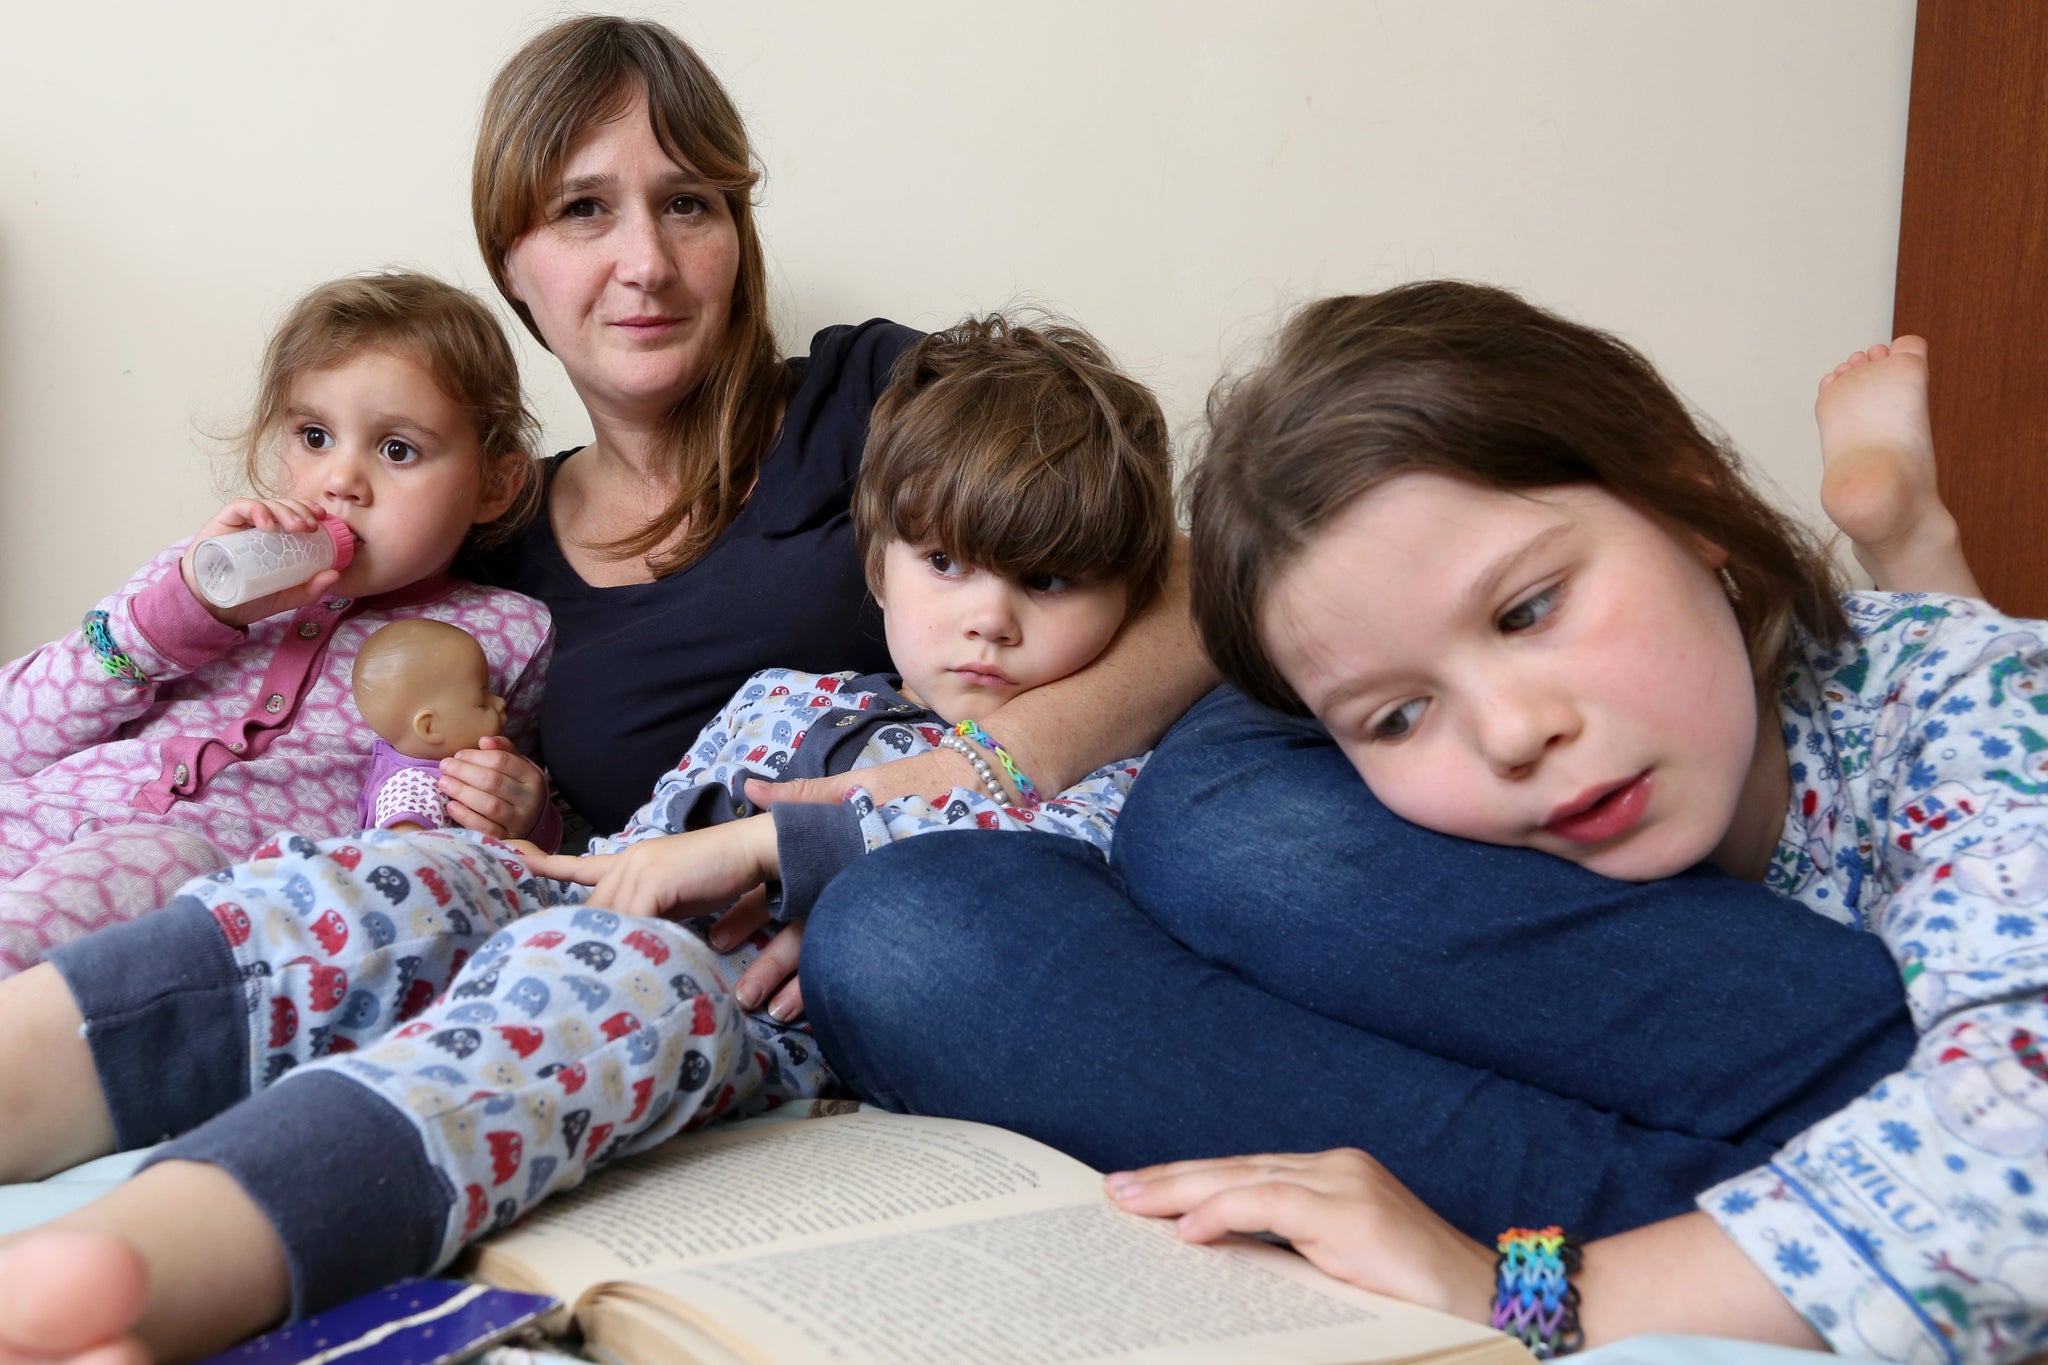 Journalist Rebecca Hardy with her three children, all of whom have shared a bed with her at some point in their lives.